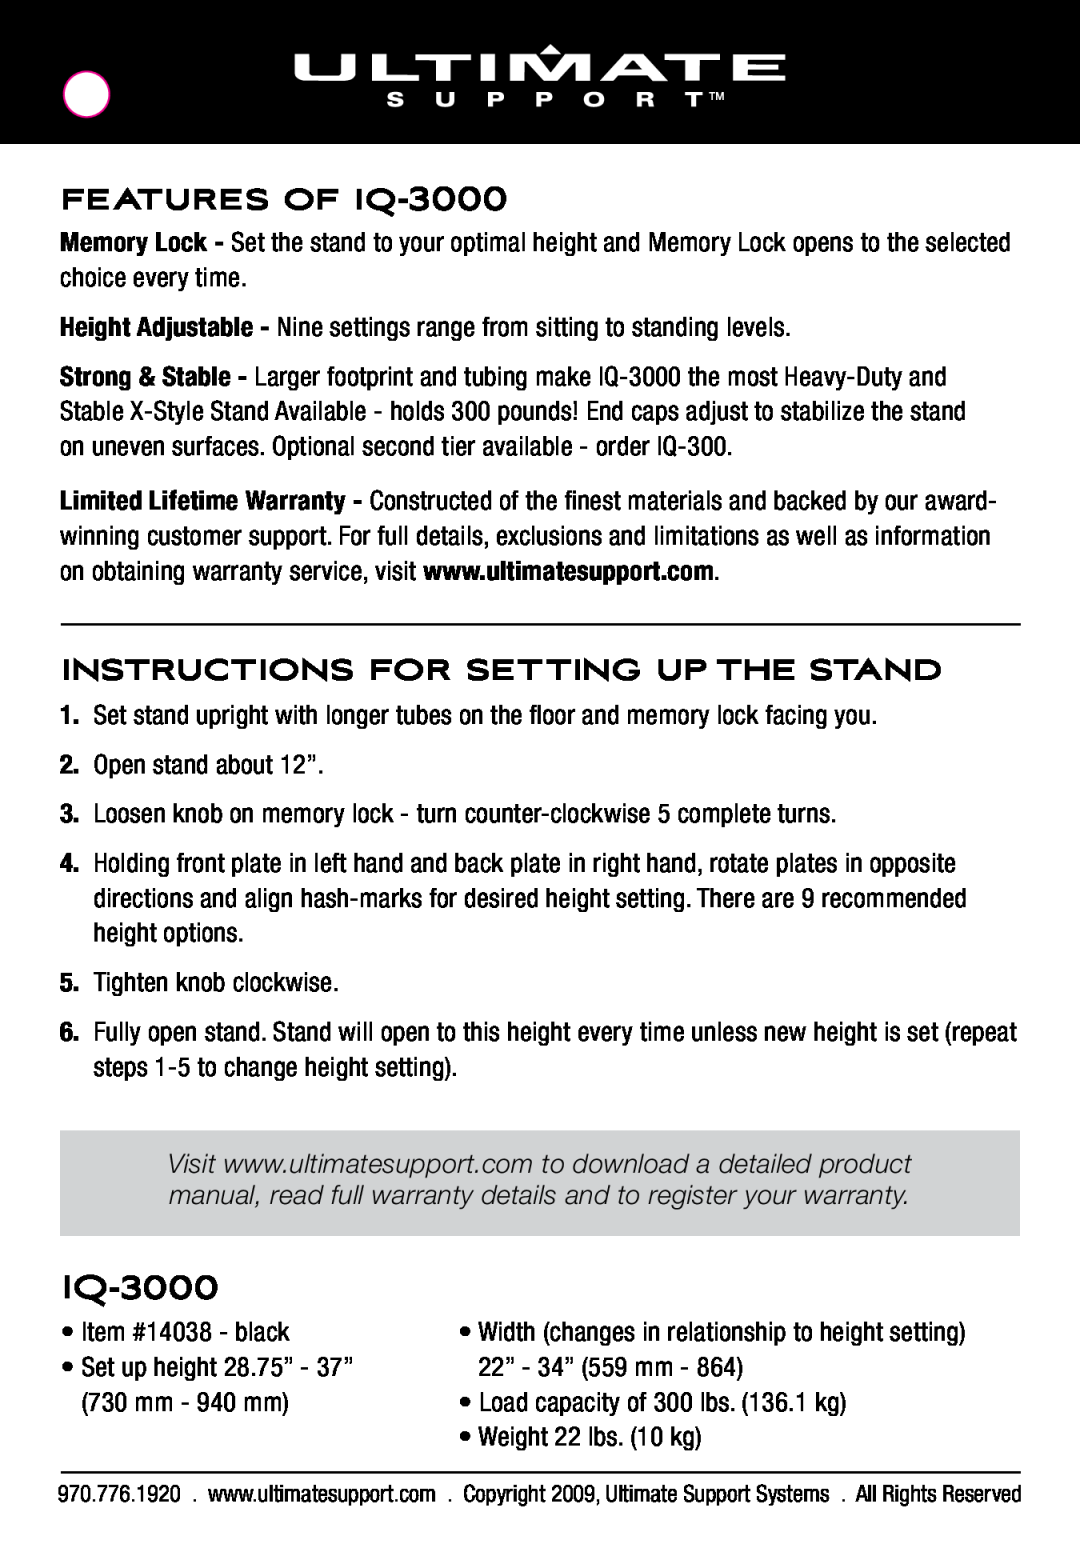 Ultimate Support Systems manual FEATURES OF IQ-3000, Instructions For Setting Up The Stand 